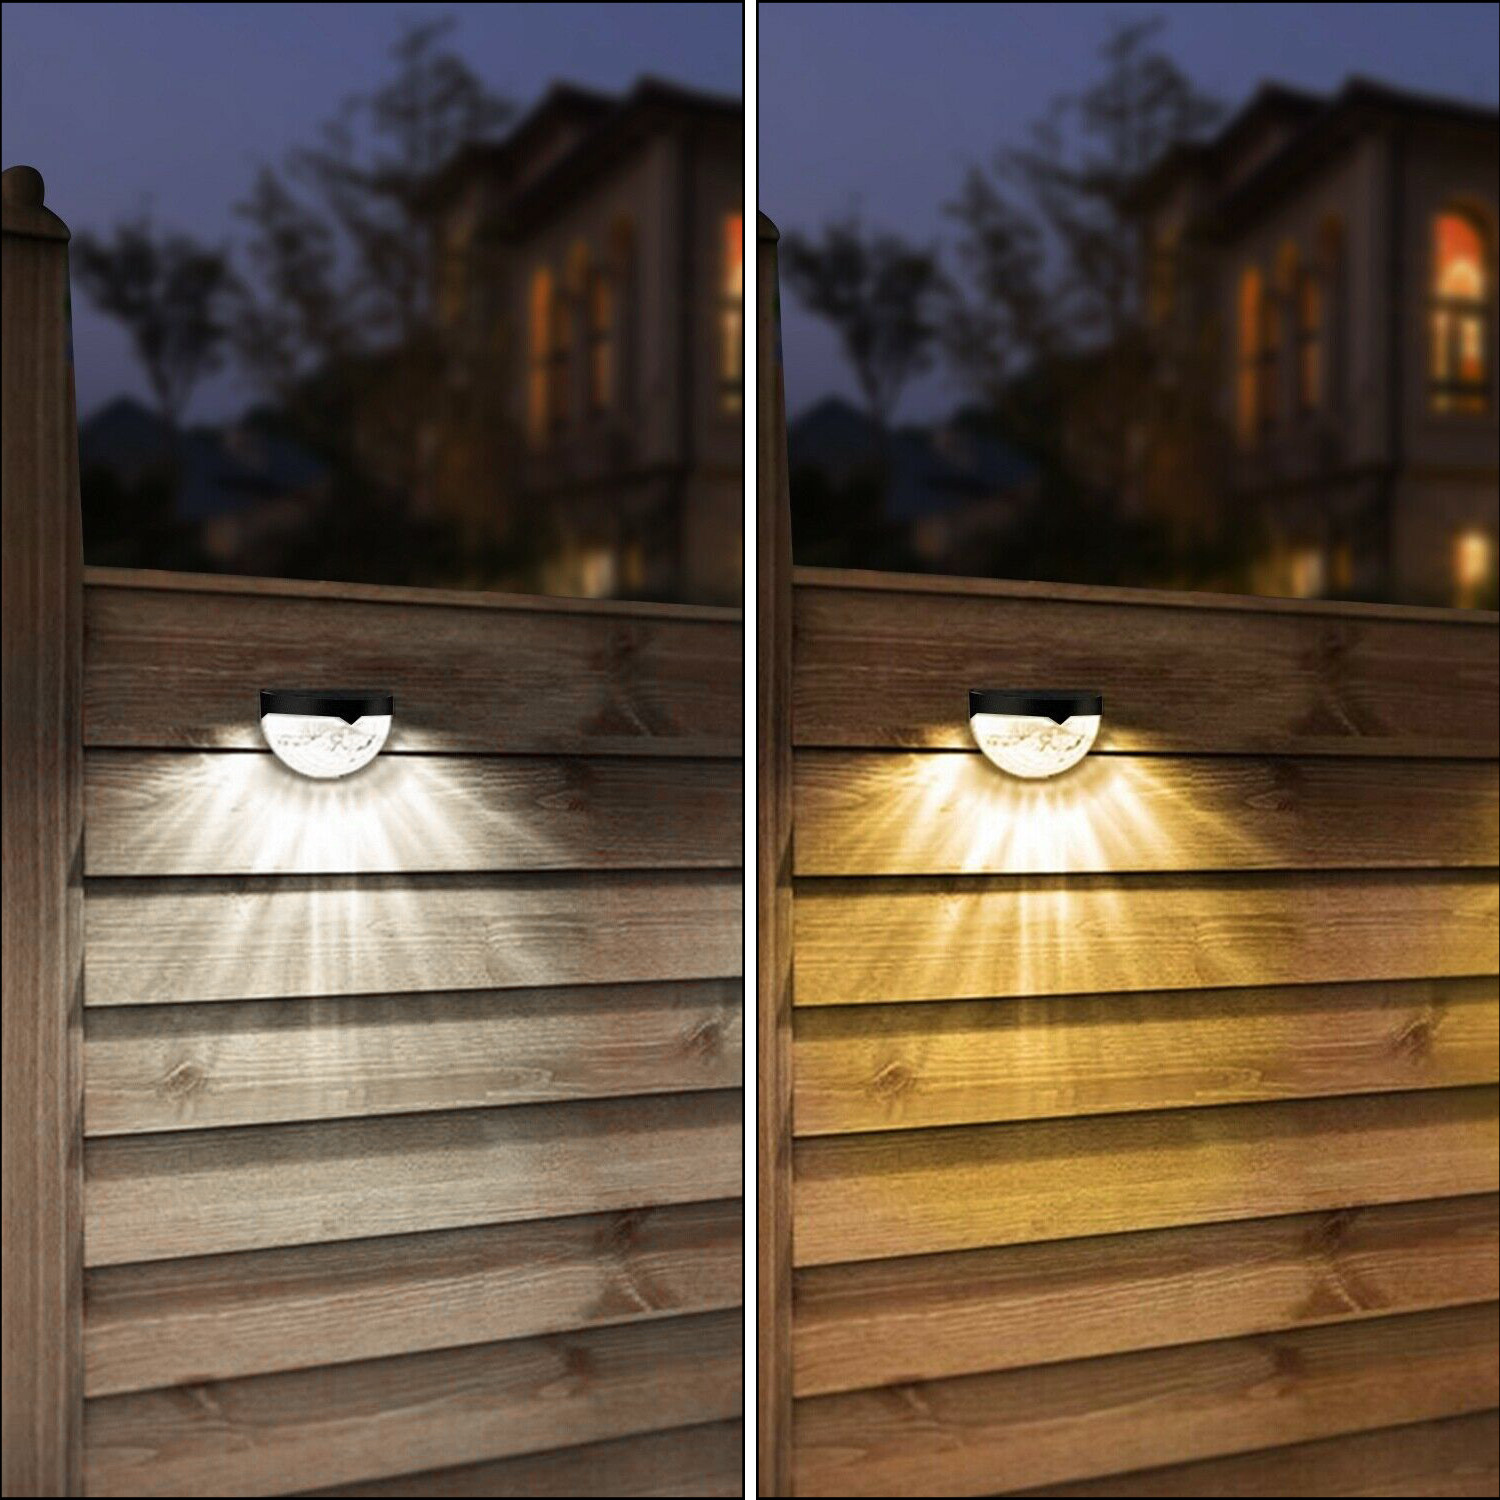 Elegant Choise Solar Wall Lights 6LED IP65 Waterproof Deck Lamps for Garden Fence Yard, 2 Pack - image 5 of 12